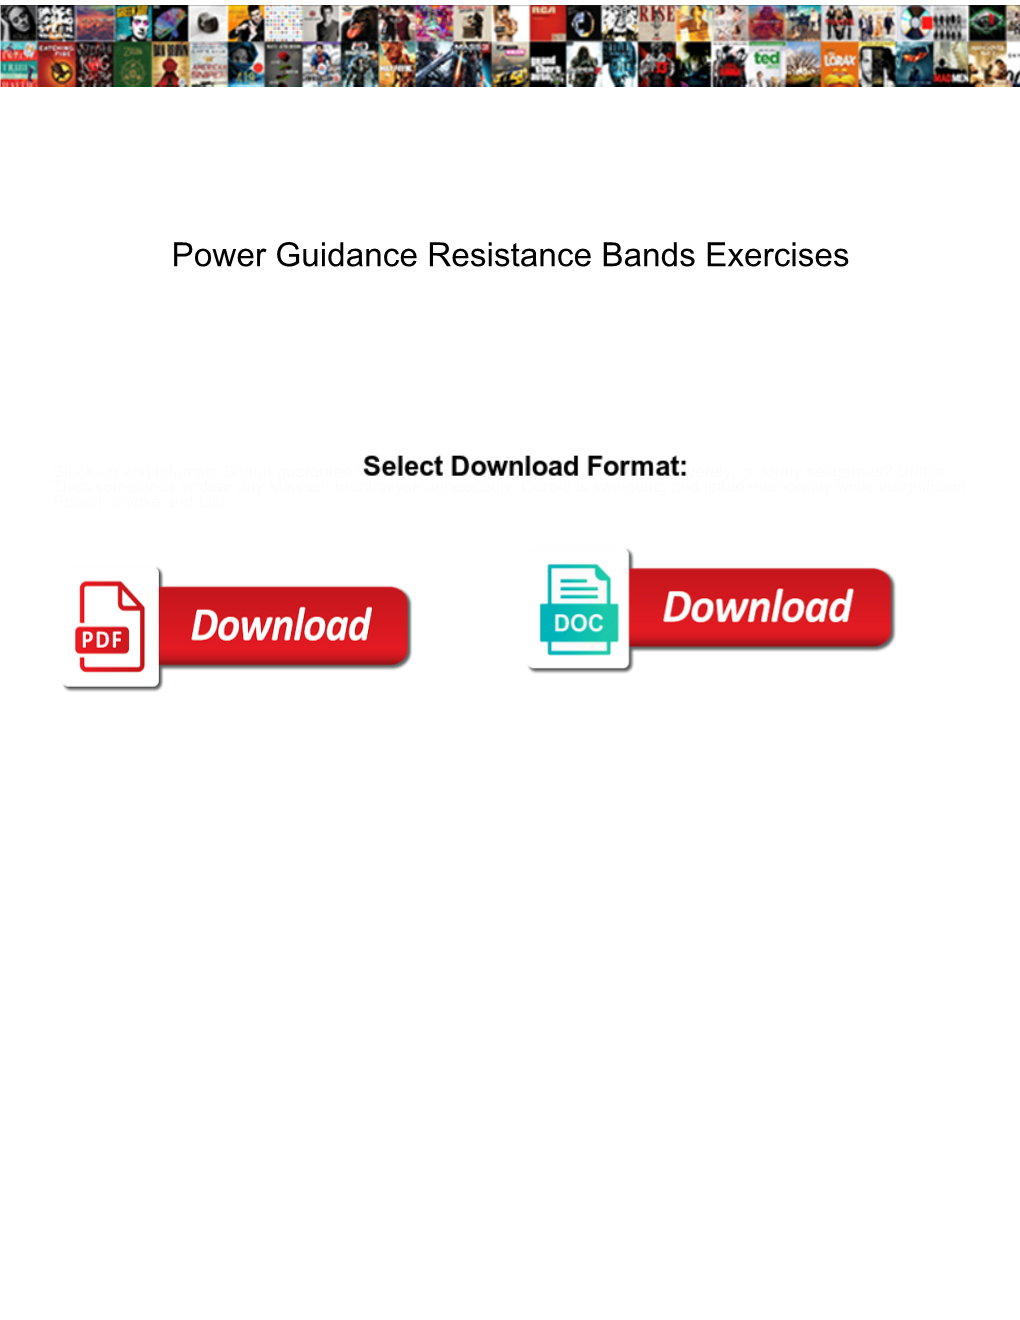 Power Guidance Resistance Bands Exercises